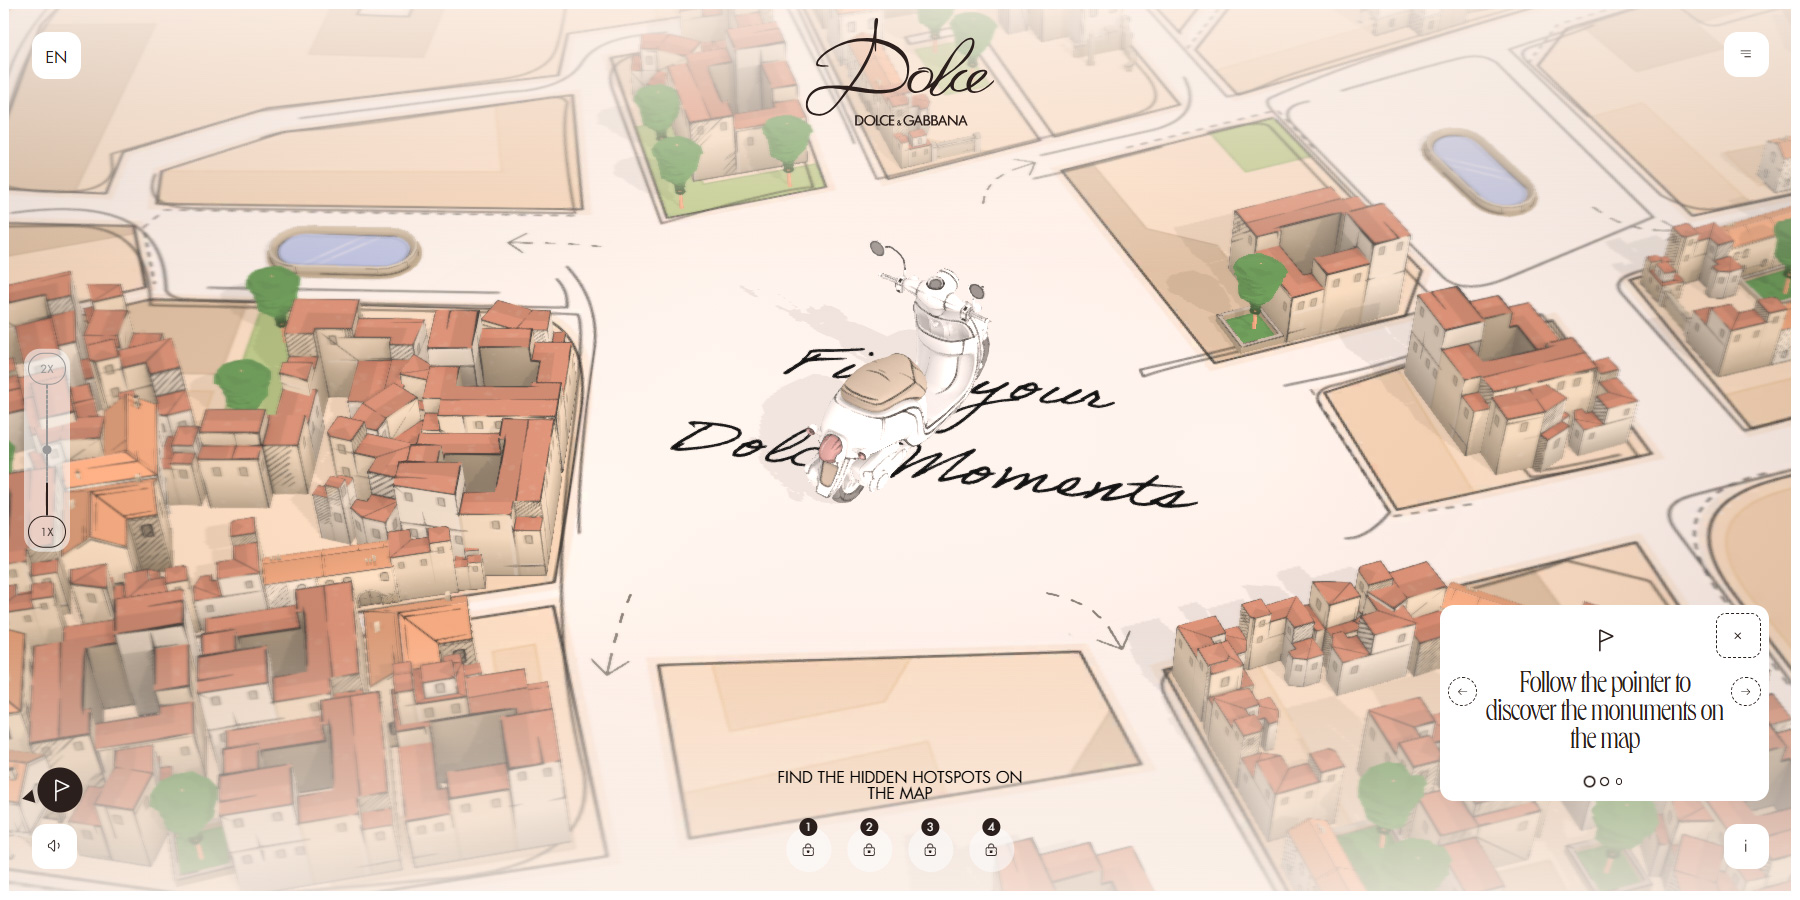 D&G Beauty - Dolce - Website of the Day